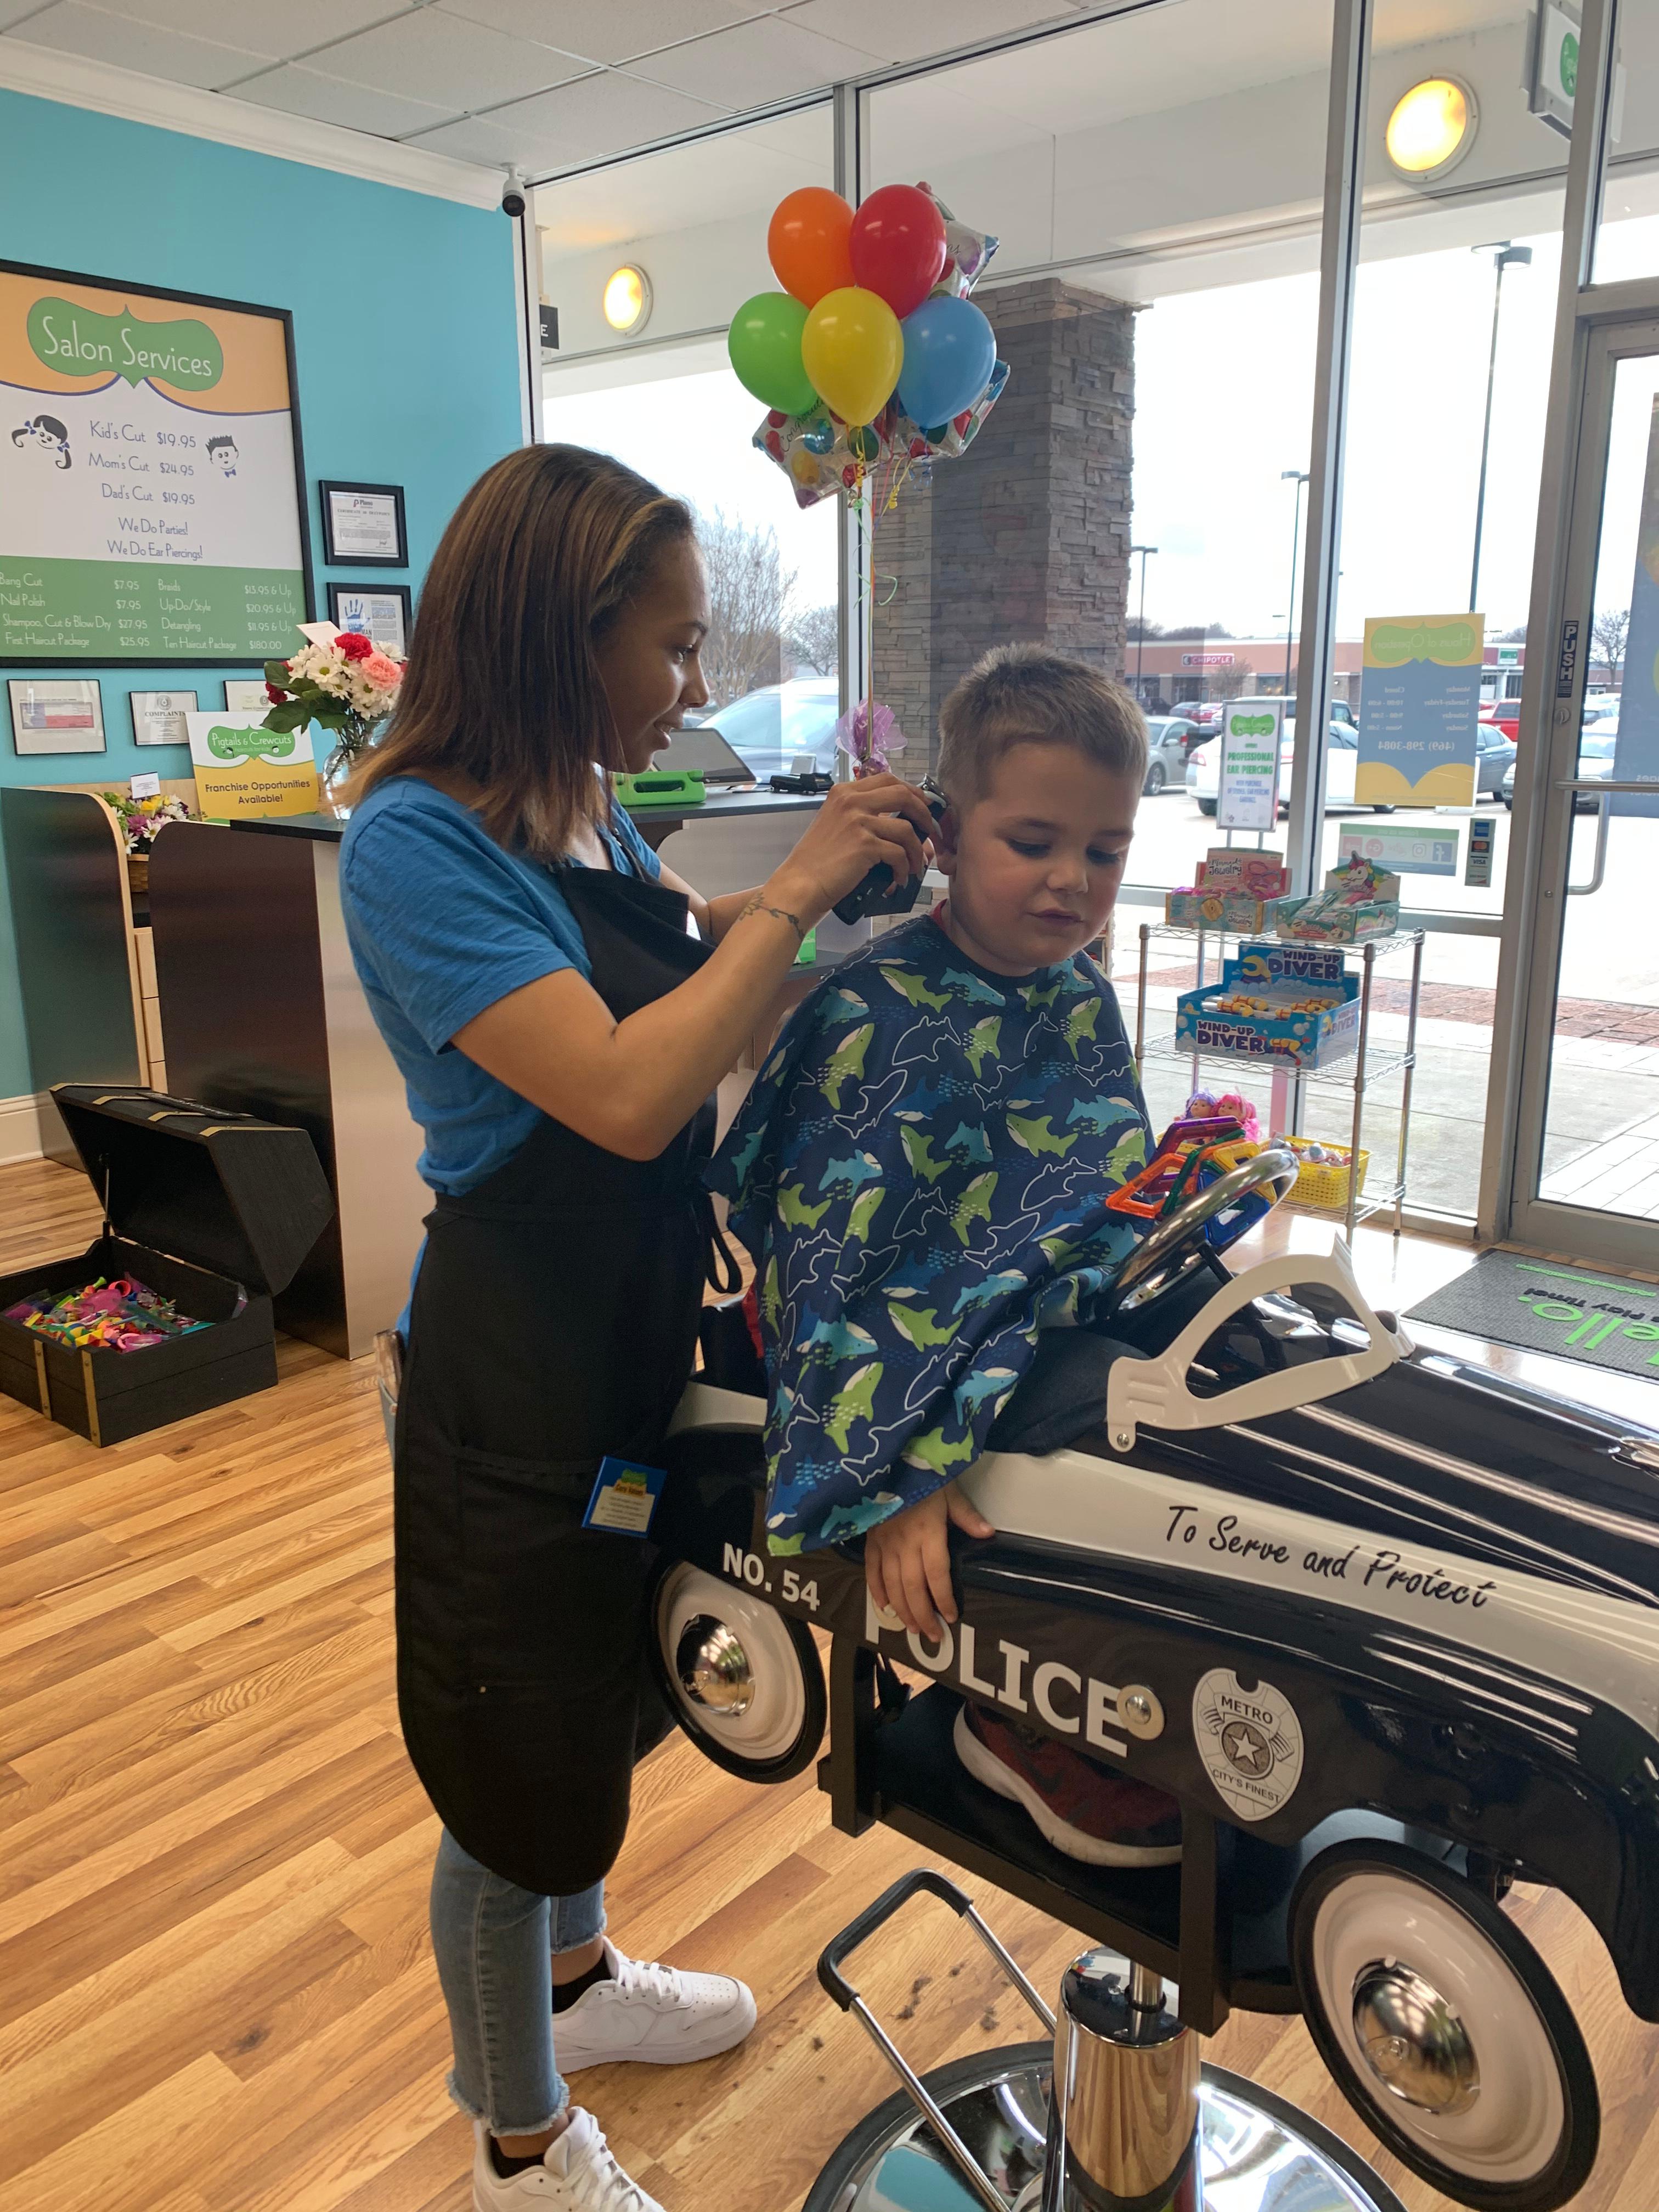 Pigtails & Crewcuts: Haircuts For Kids - Plano Photo